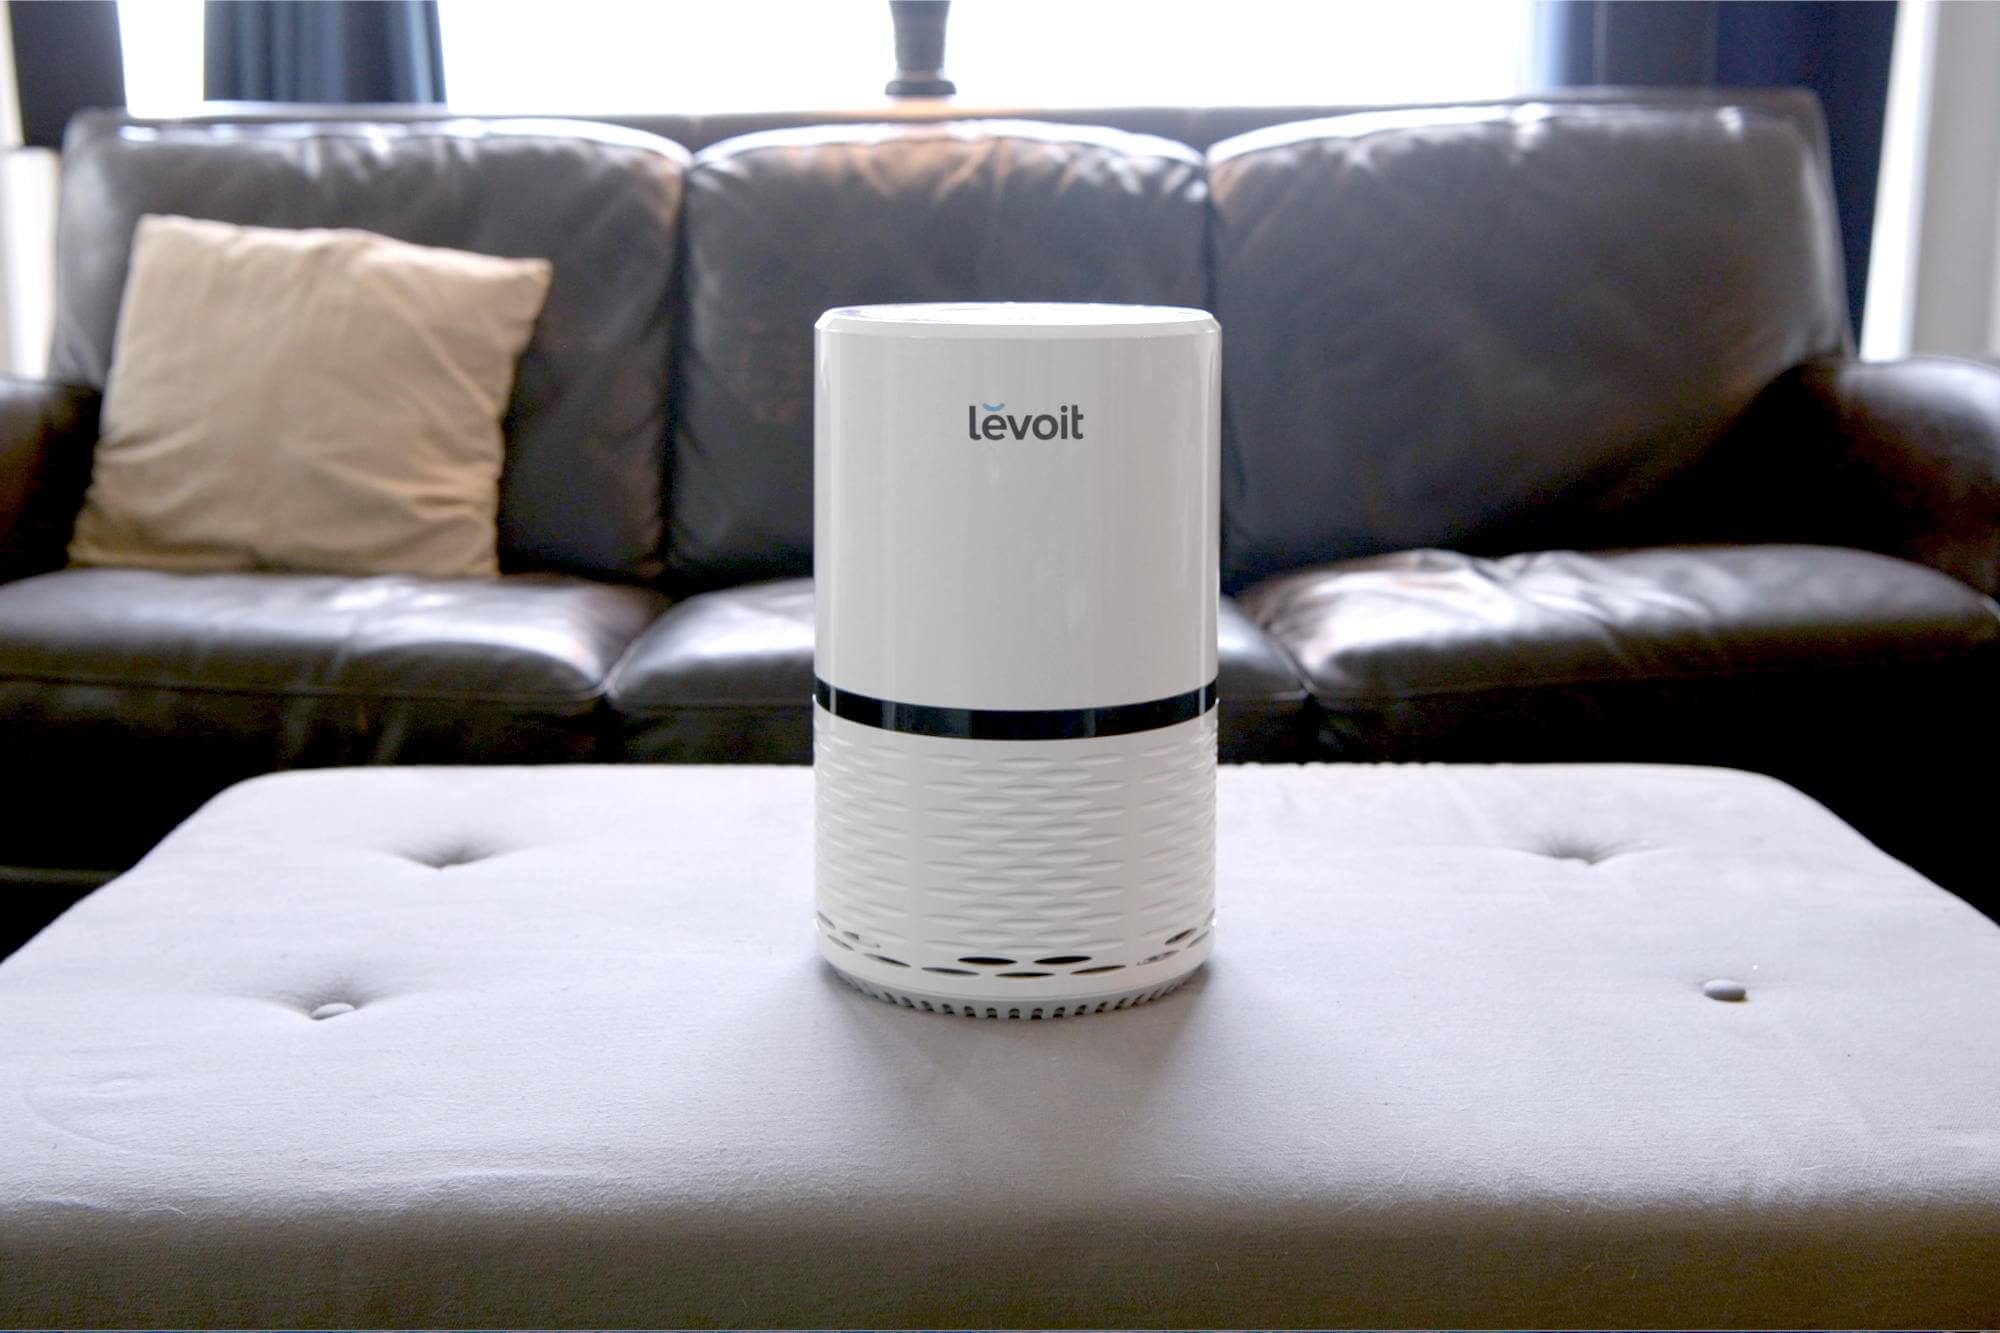 Levoit air purifier in living room